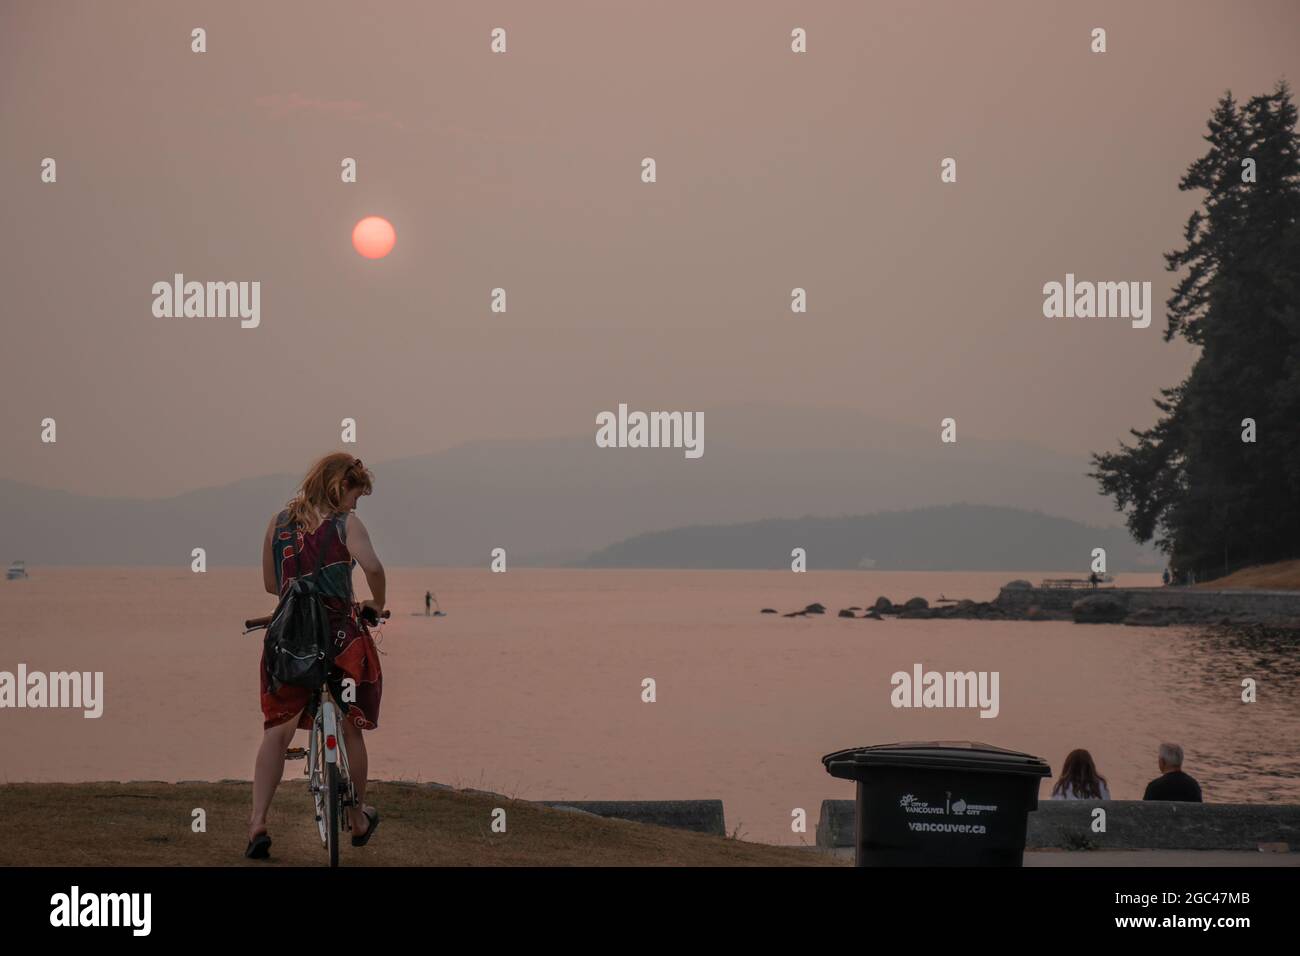 Vancouver, Canada -August 1,2021: Smokey Sky over Vancouver from wildfires. Photo shows the woman standing on a second beach in Stanley Park at sunset Stock Photo